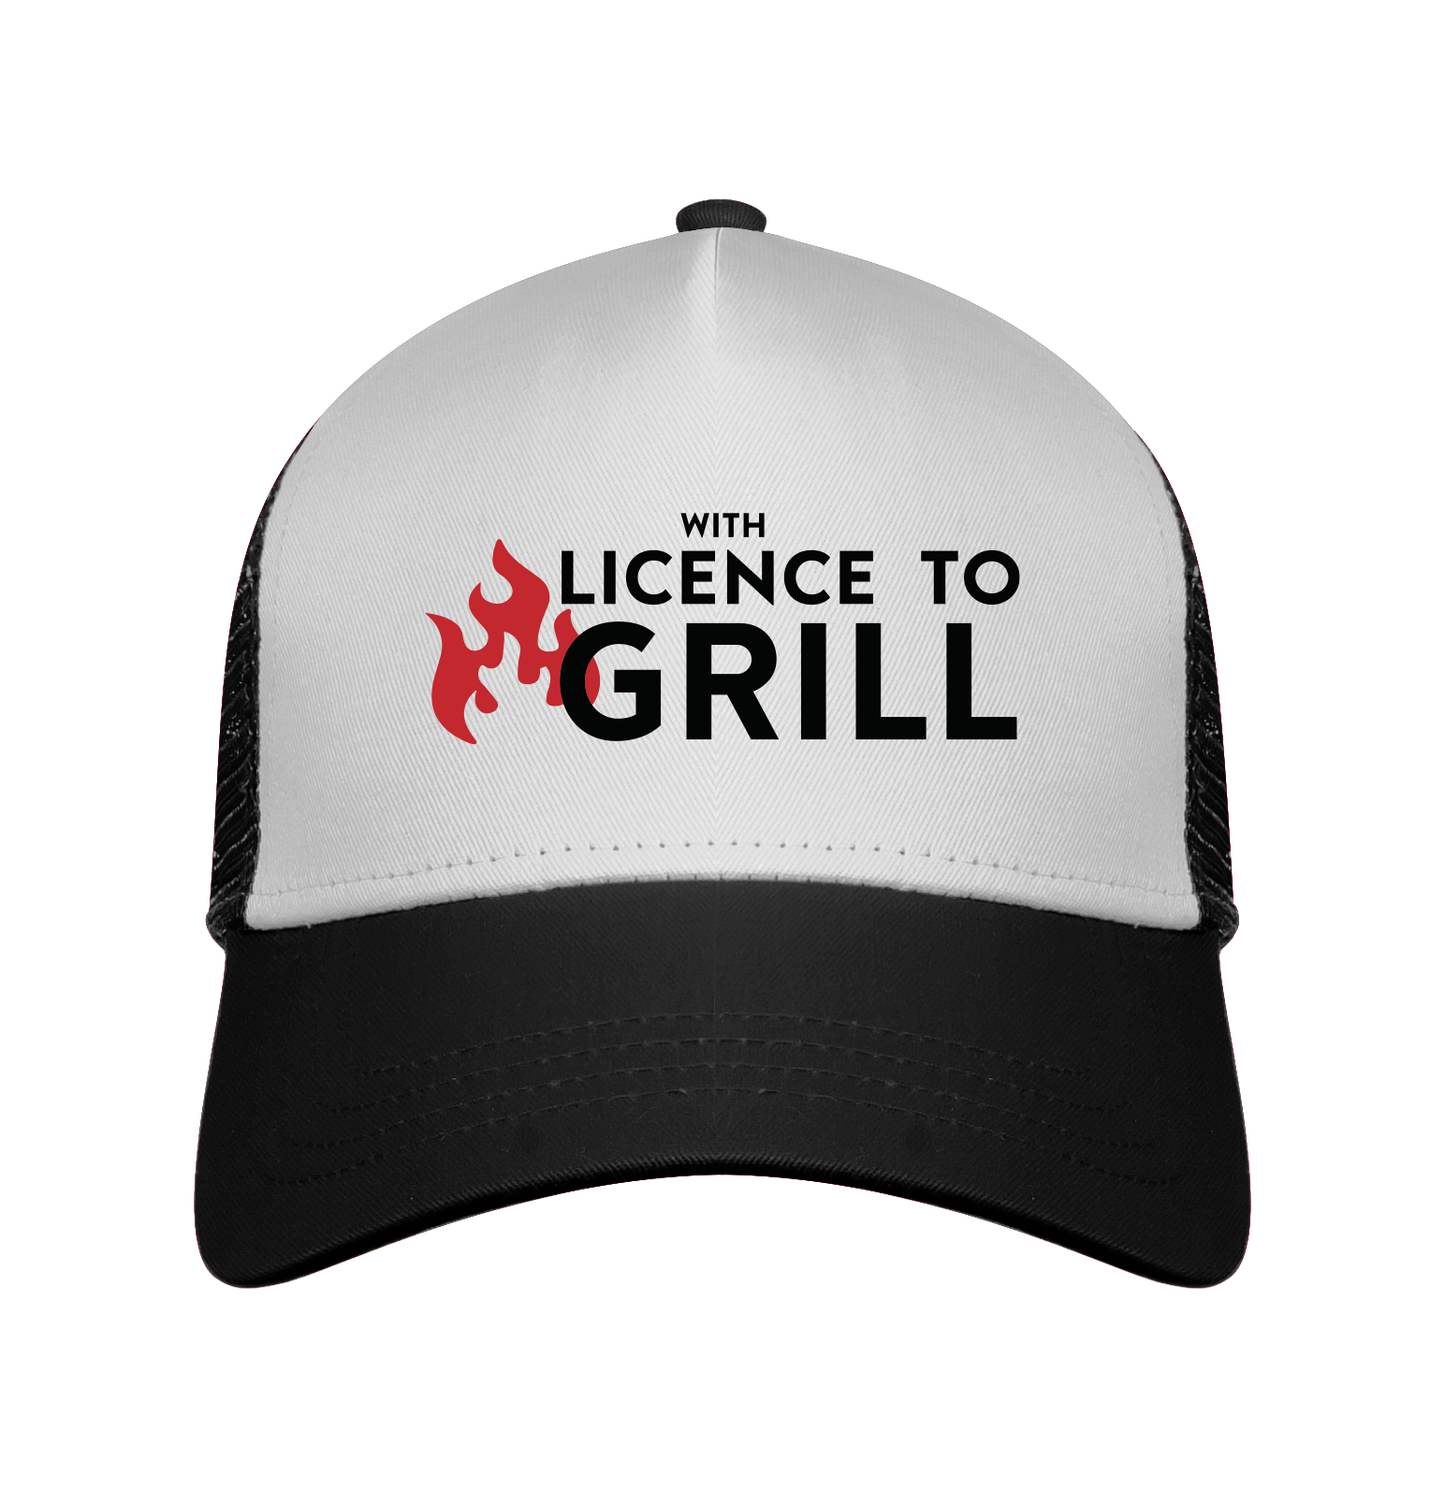 With licence to grill caps